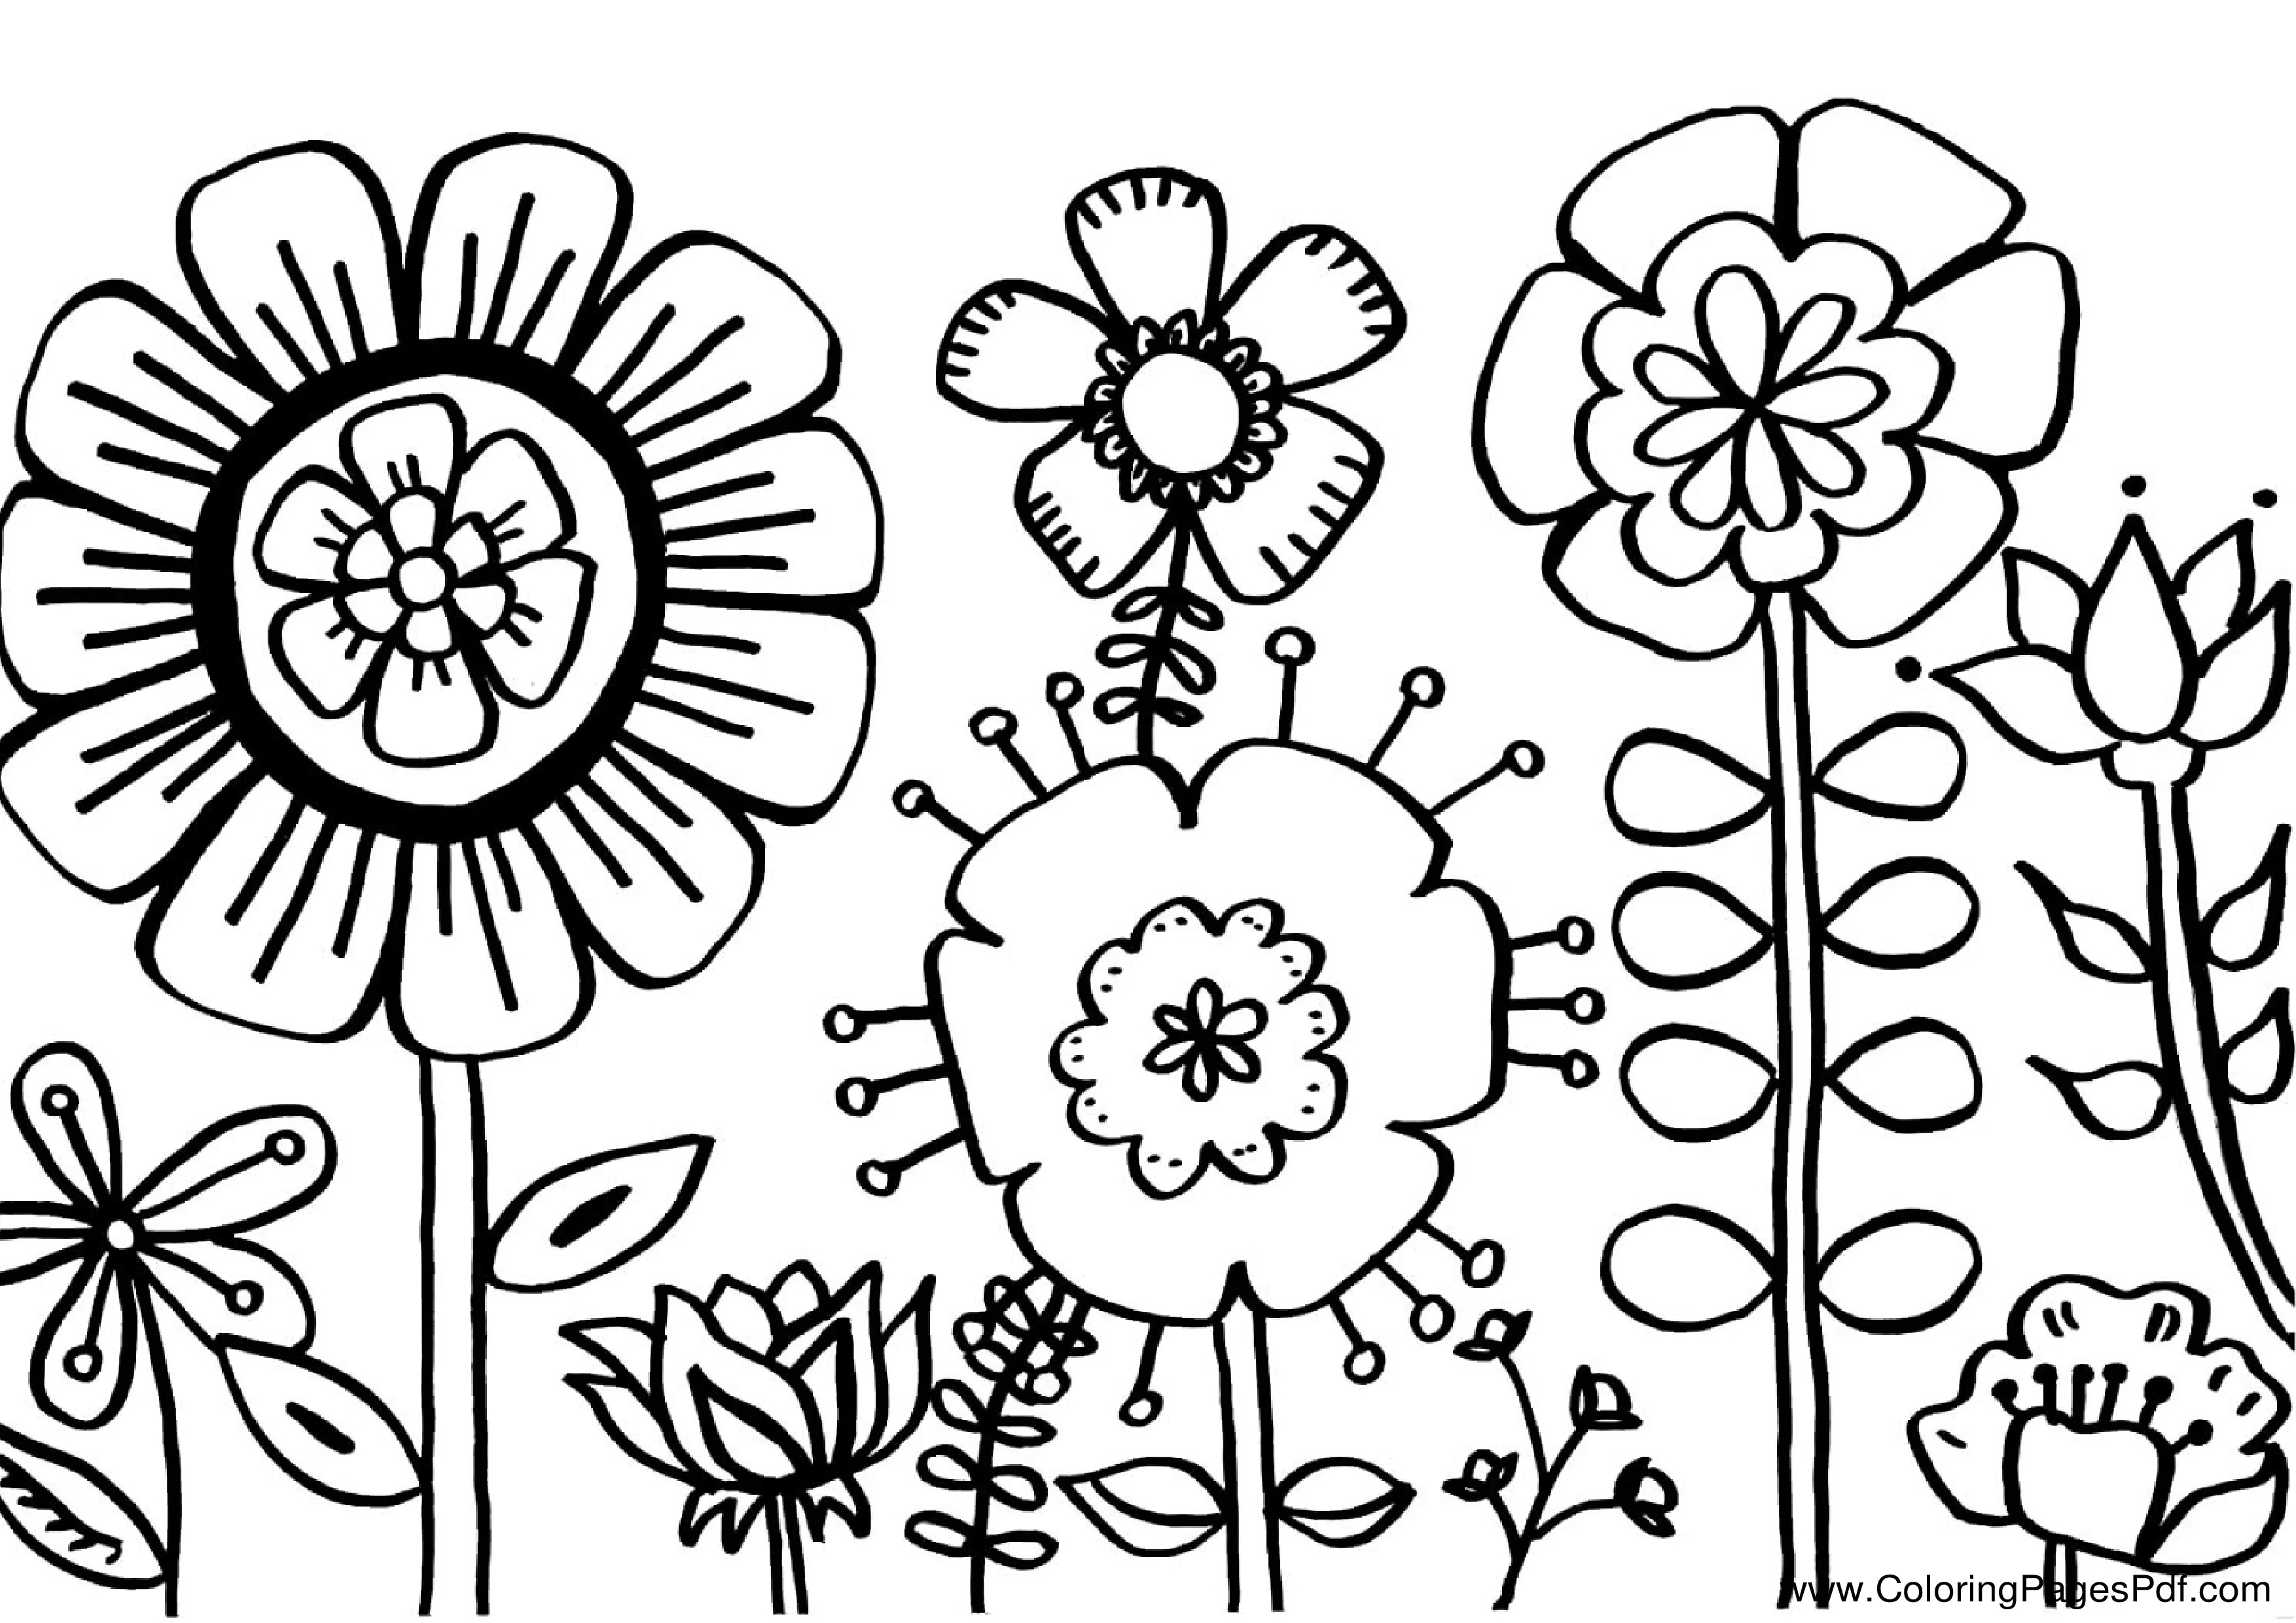 Free printable Coloring pages for kids pdf